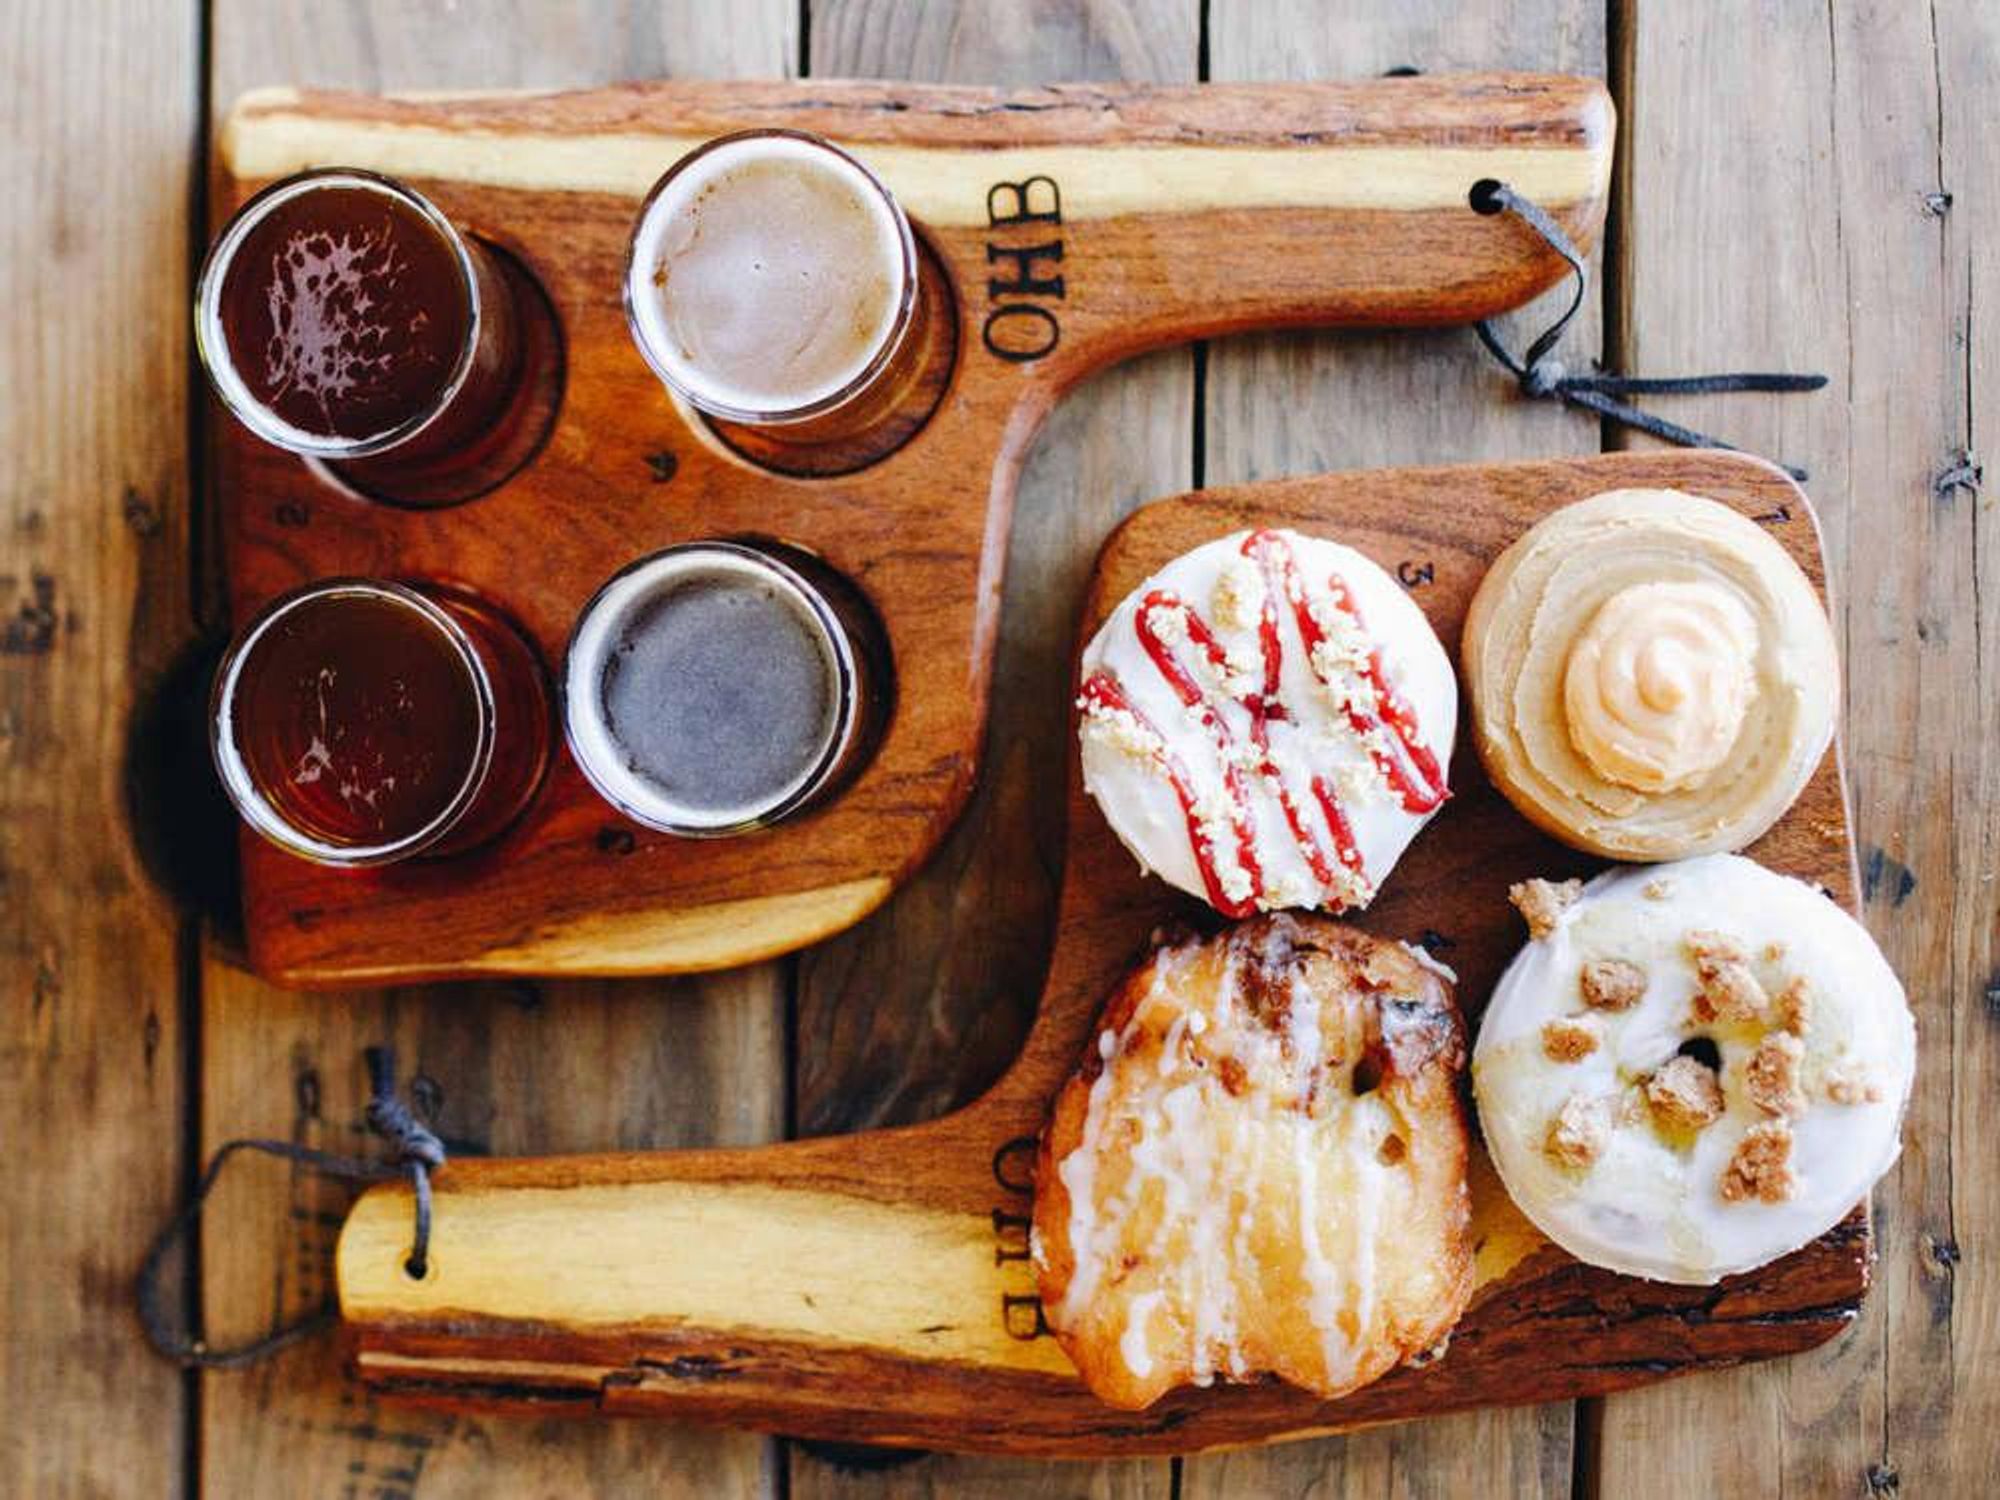 Hypnotic Donuts & Oak Highlands presents Beer and Donut Pairing